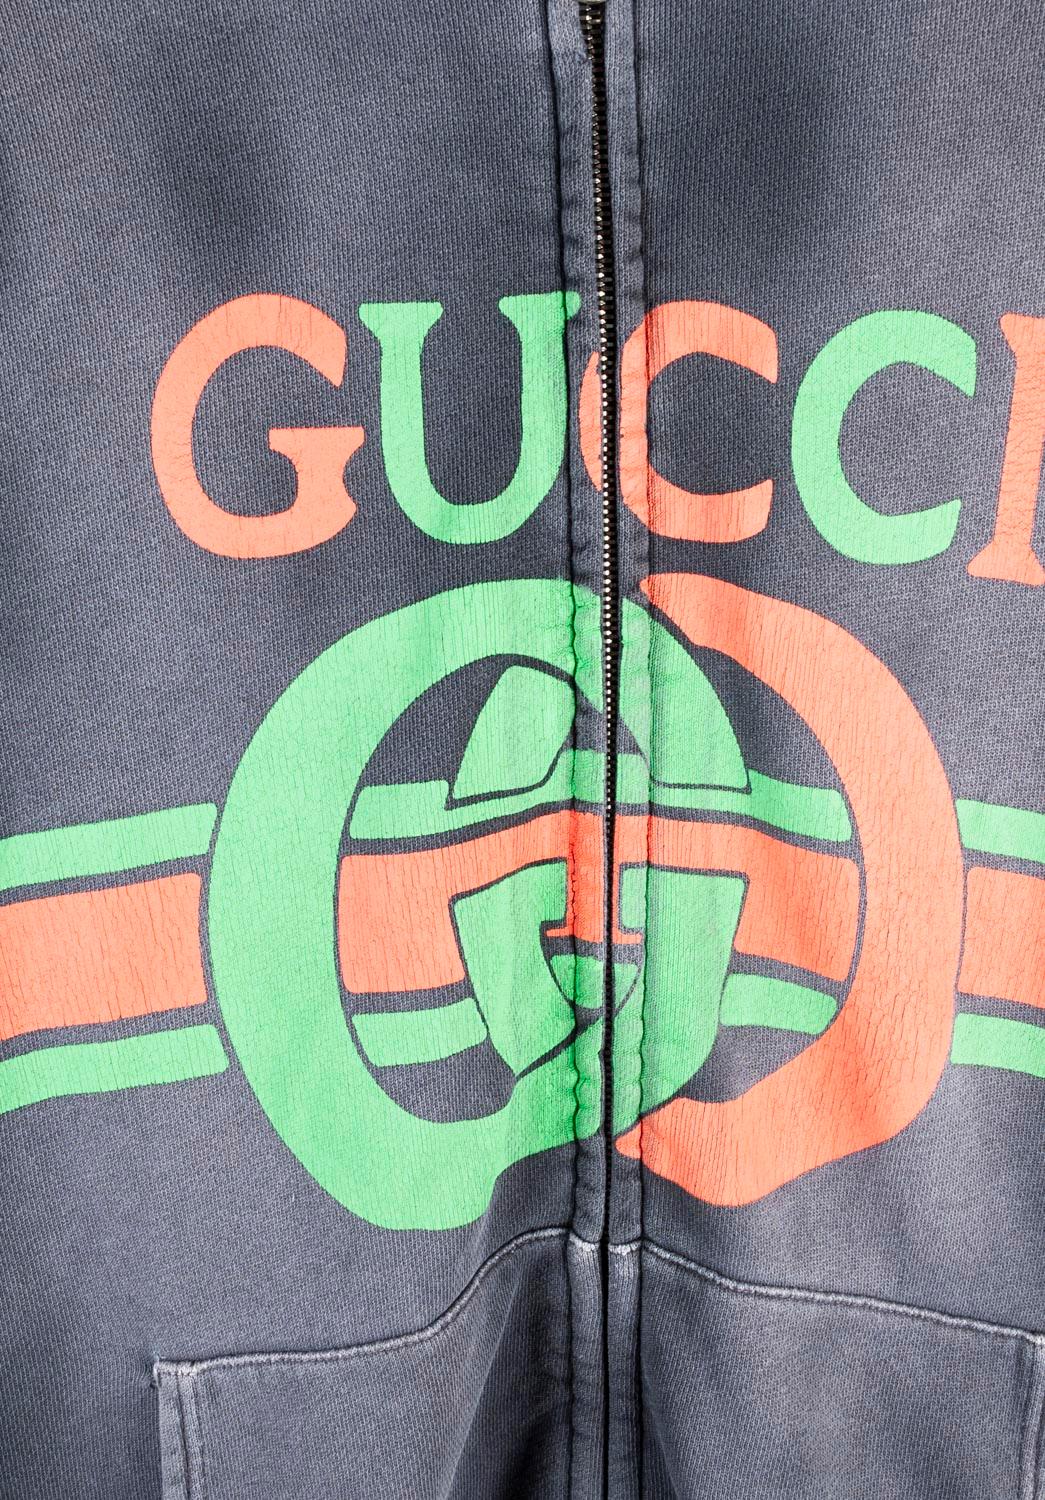 Gucci Men Jumper Hooded Distressed Full Zip Heavy Reversible Jacket, Size M, S66 In Good Condition For Sale In Kaunas, LT